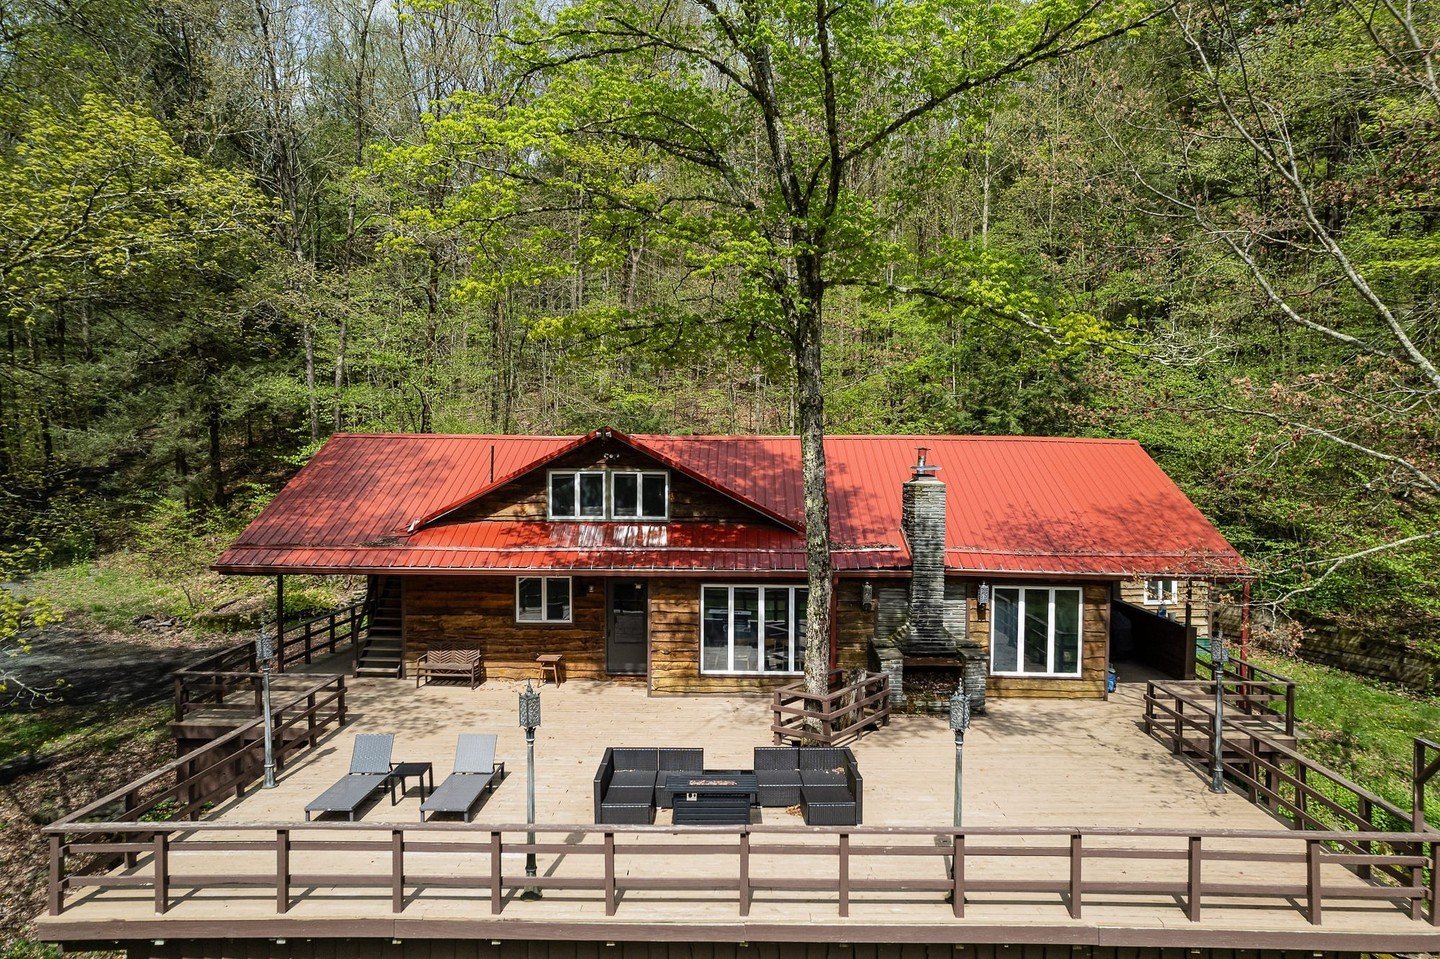 NEW 💫

Hidden Hollow is one of the TWELVE properties that are part of our upcoming Spring Open House Weekend (visit our site for full OH details.) 

Hidden Hollow presents an idyllic mountain escape, boasting over 12 acres of secluded land with Tar 